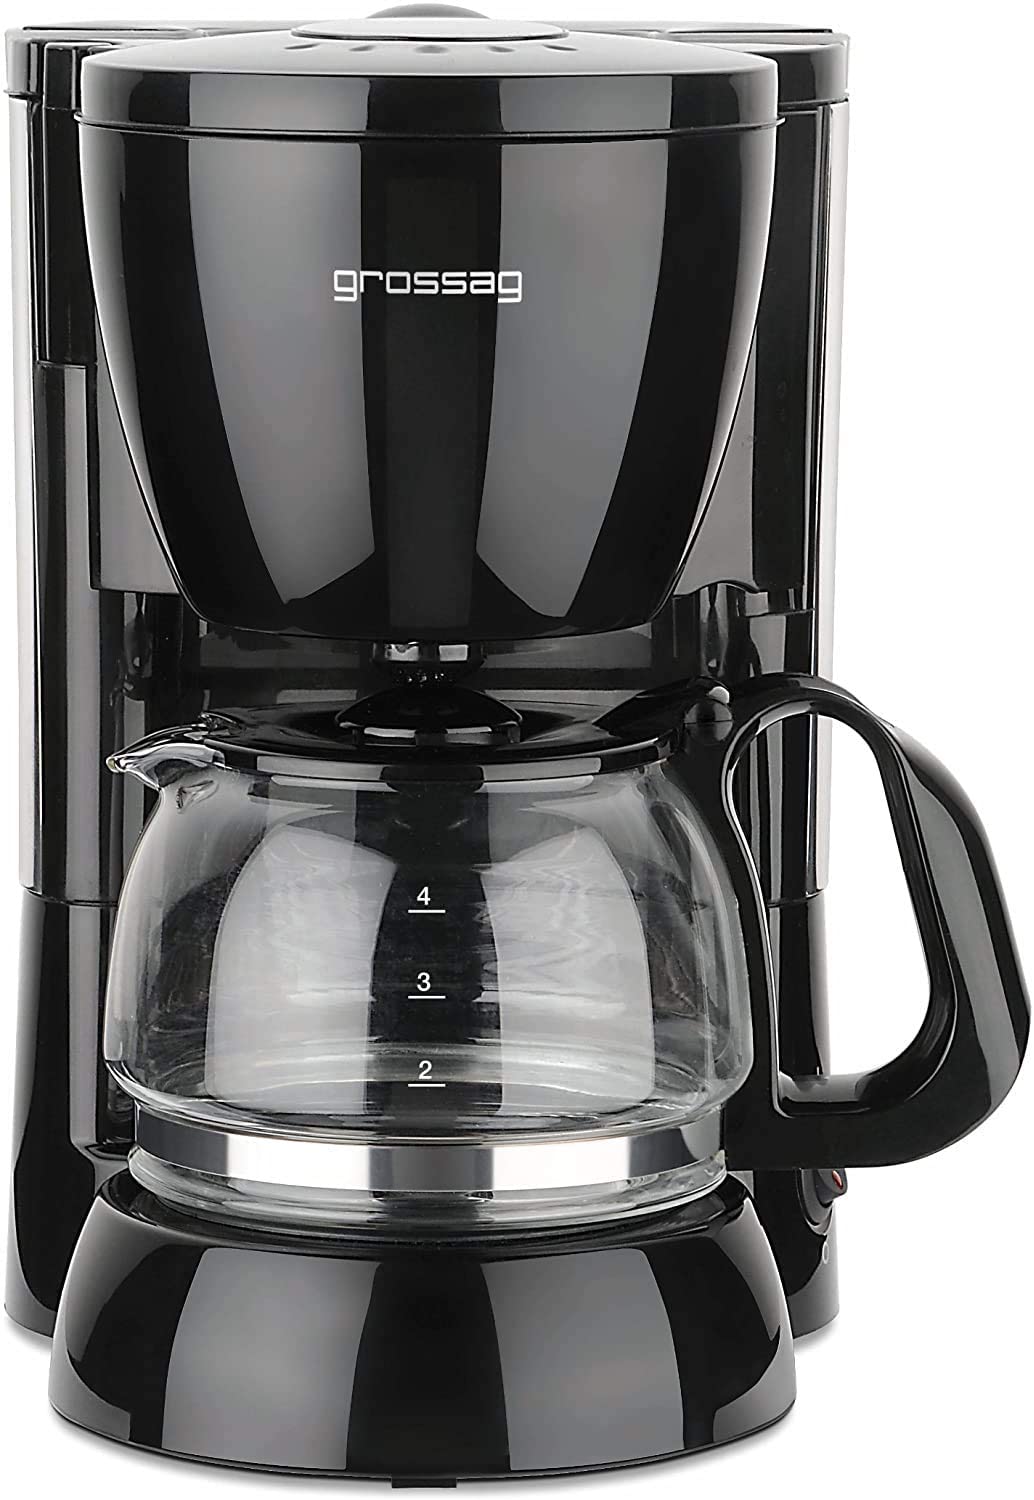 grossag KA 12.17 Filter Coffee Machine with Glass Jug | 0.6 Litres for 4 Cups of Coffee | 600 Watt | Black - Stainless Steel